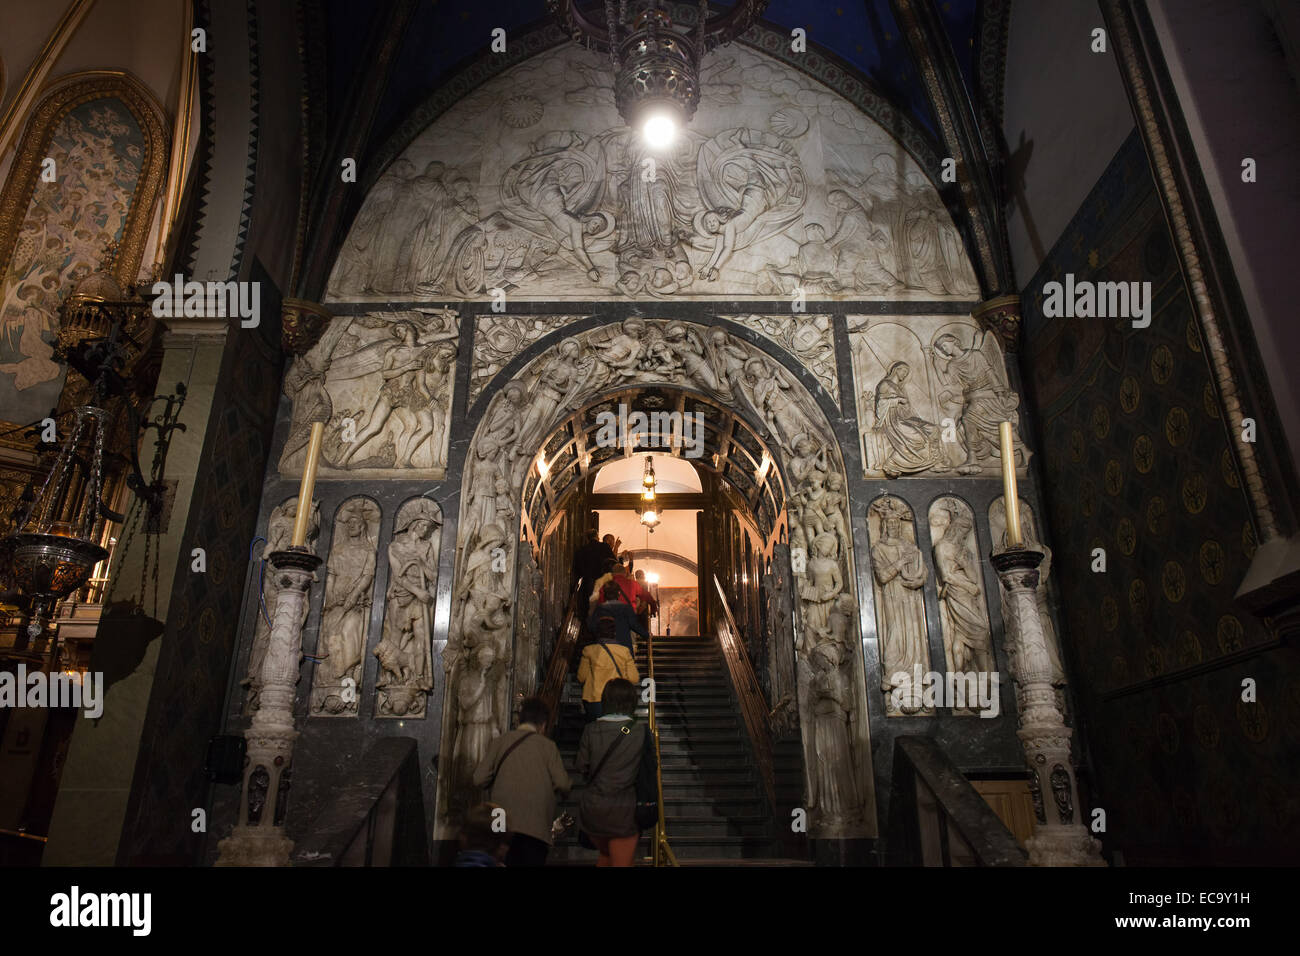 Basilica interior of the Montserrat Monastery in Catalonia, Spain. Pilgrims and tourists queueing up to the Black Madonna statue Stock Photo